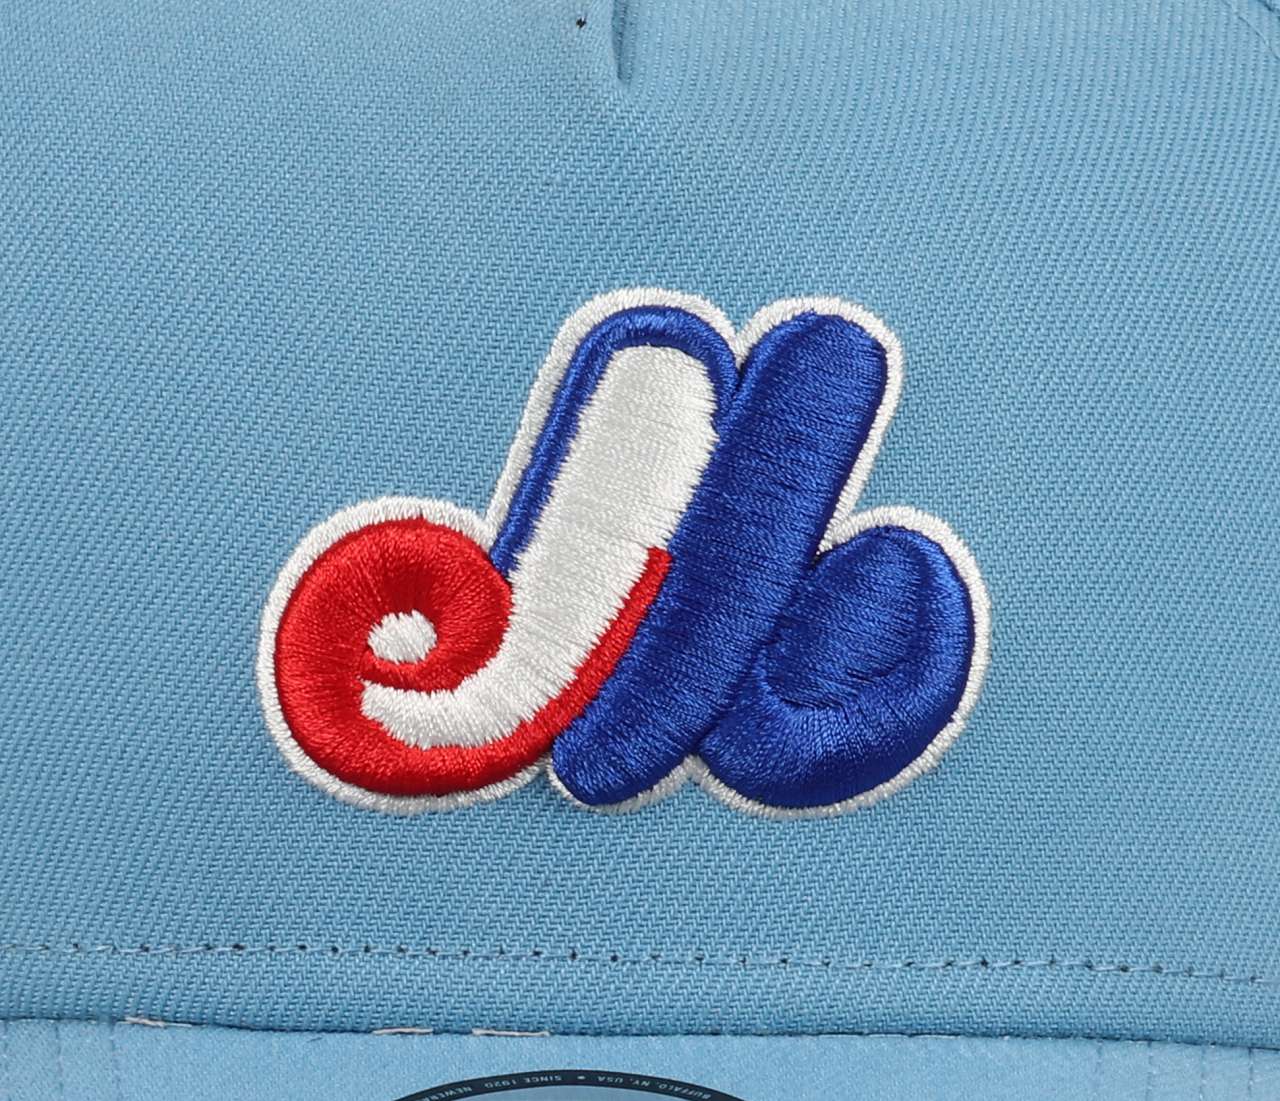 Montreal Expos MLB Cooperstown Sky Blue 9Forty A-Frame Snapback Cap New Era